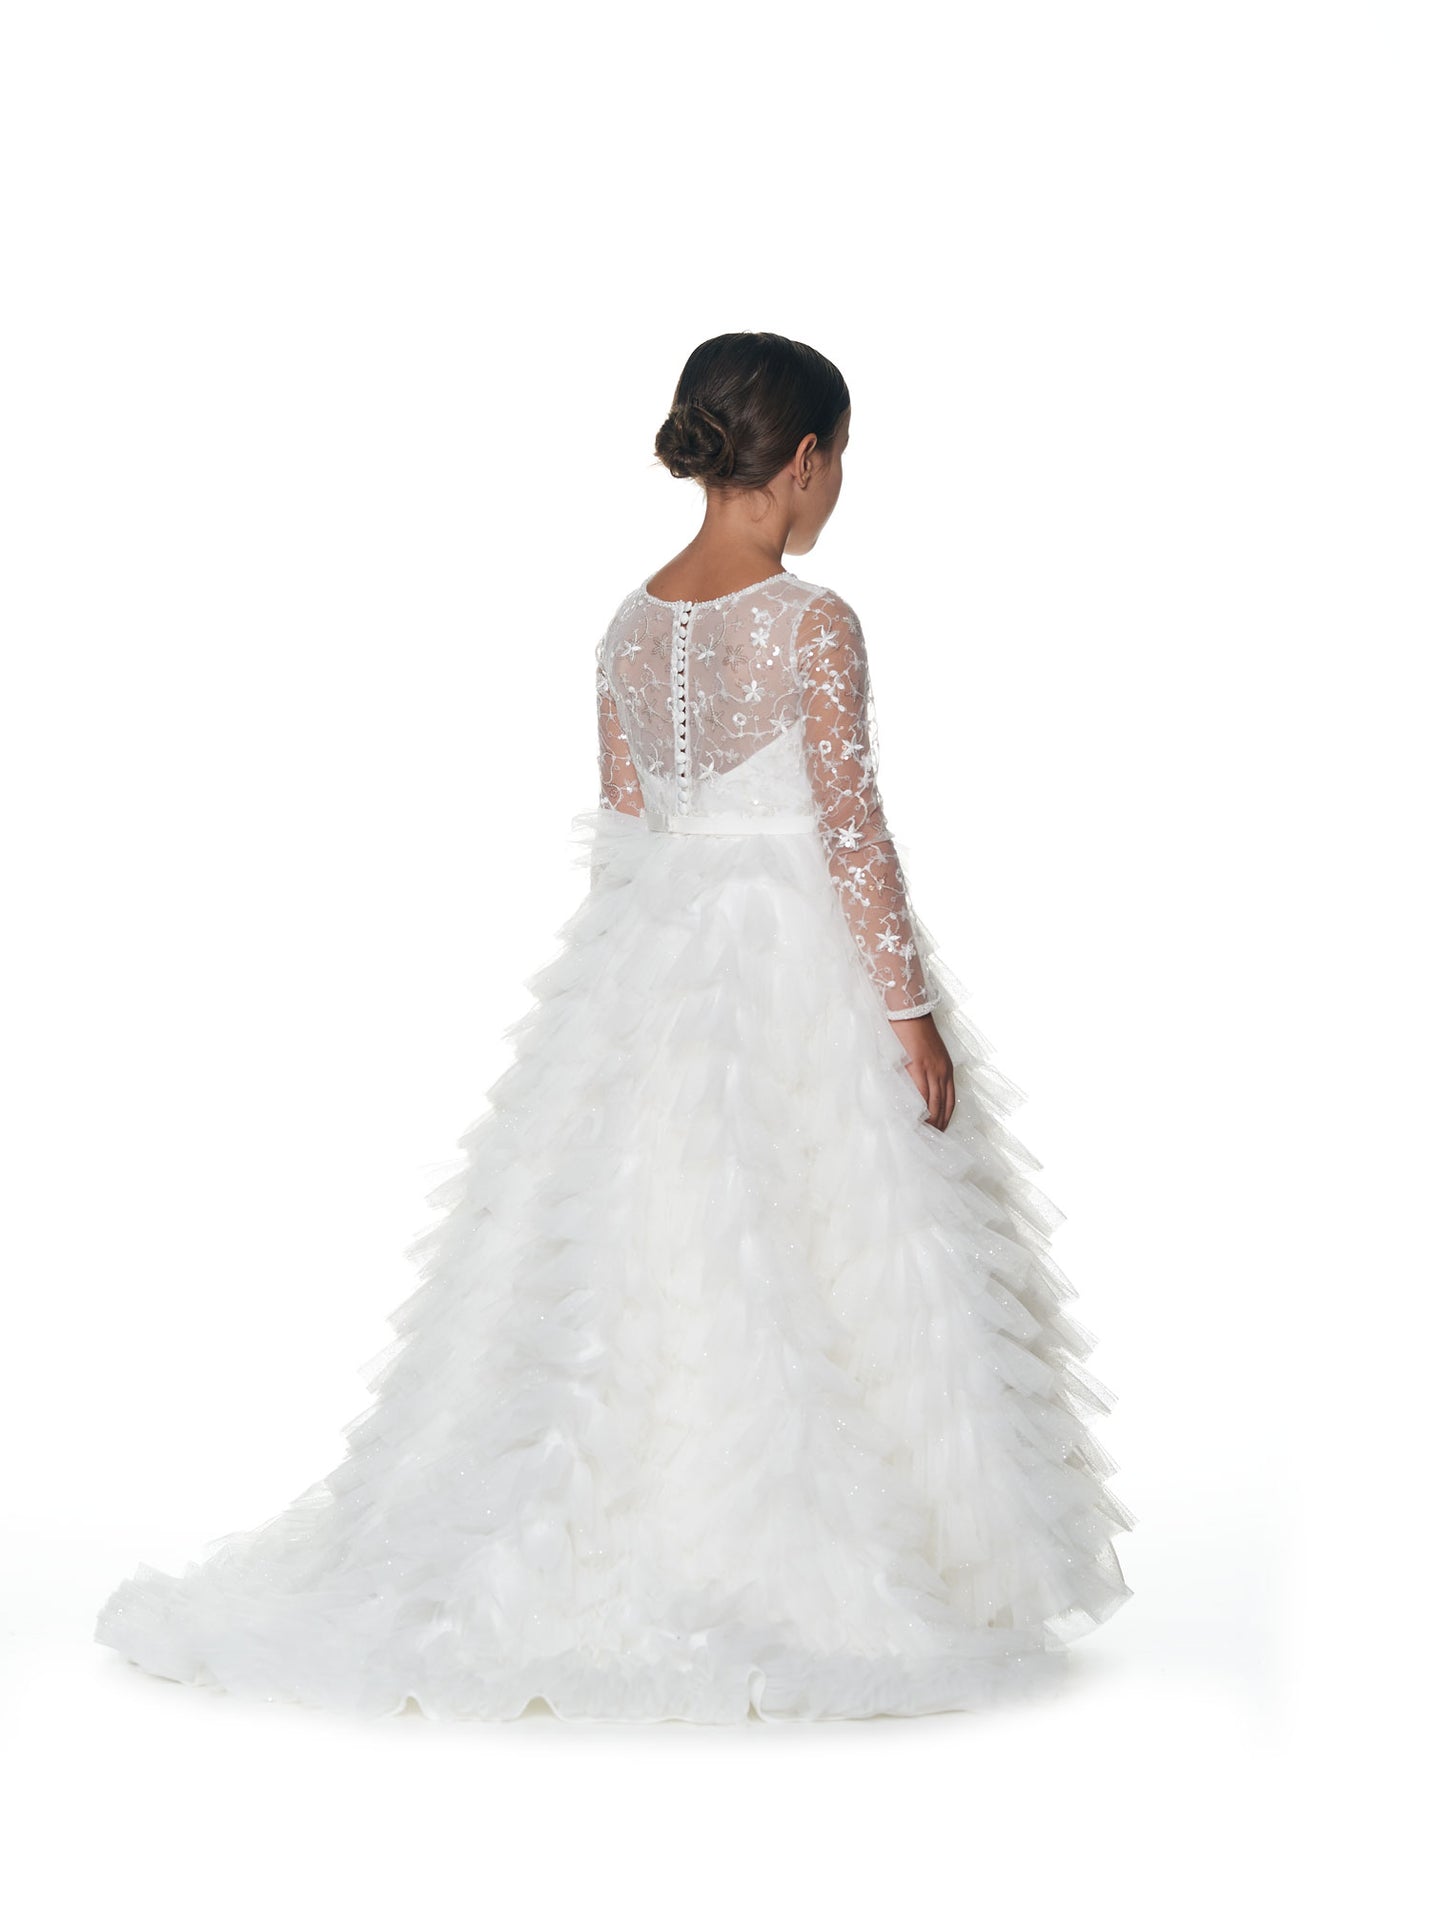 The Fiva Gown